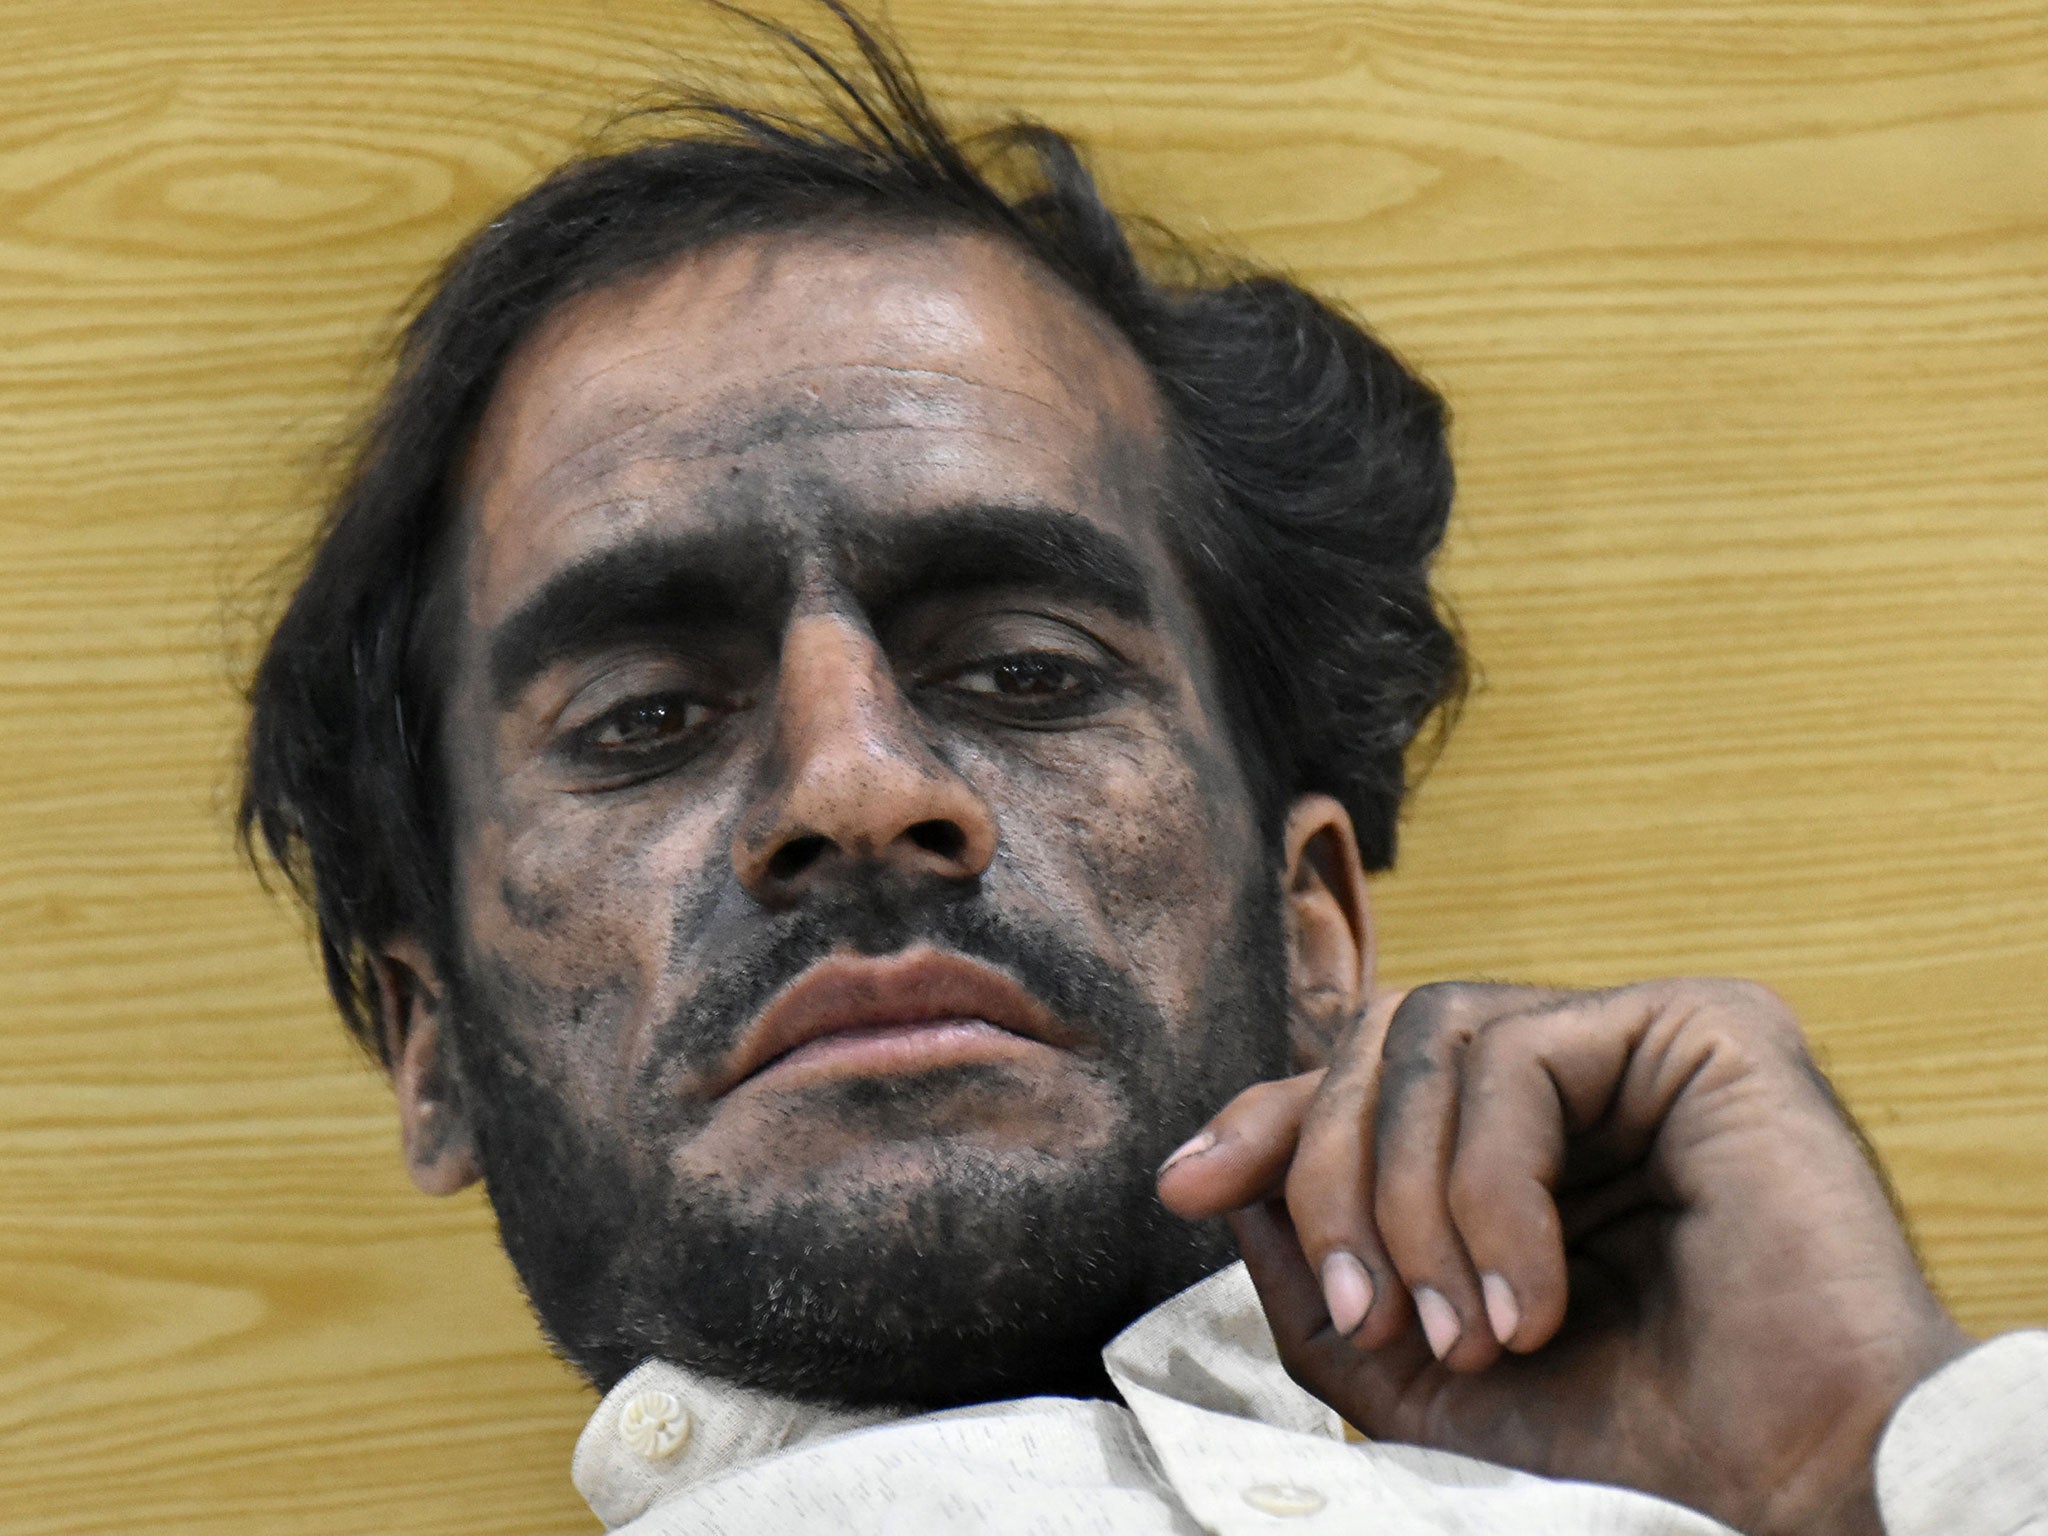 A worker who survived after a coal mine explosion rests at a hospital in Quetta, Pakistan